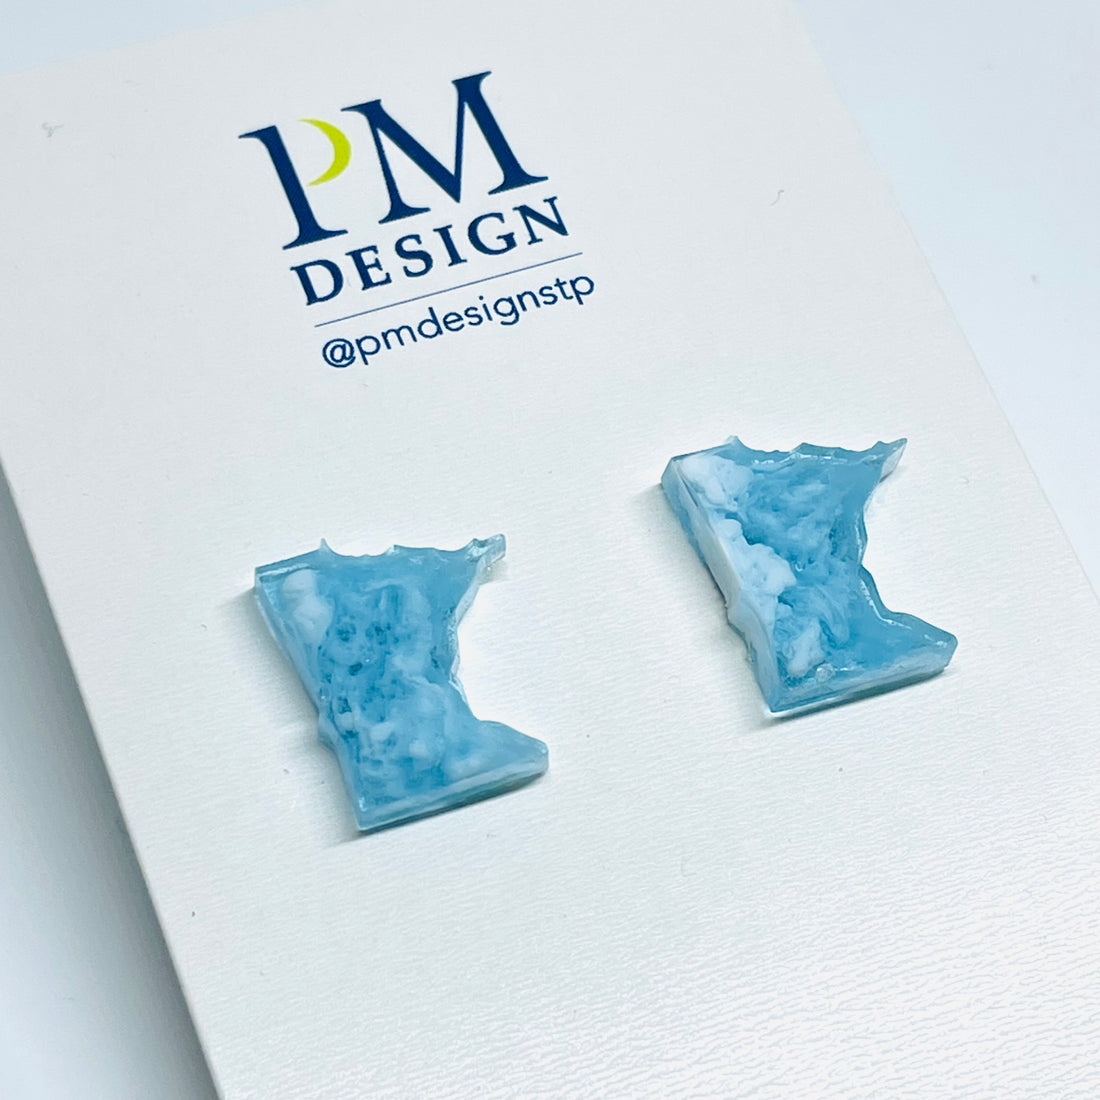 Tiny Minnesota State shaped stud/post earrings - Blue and white resin